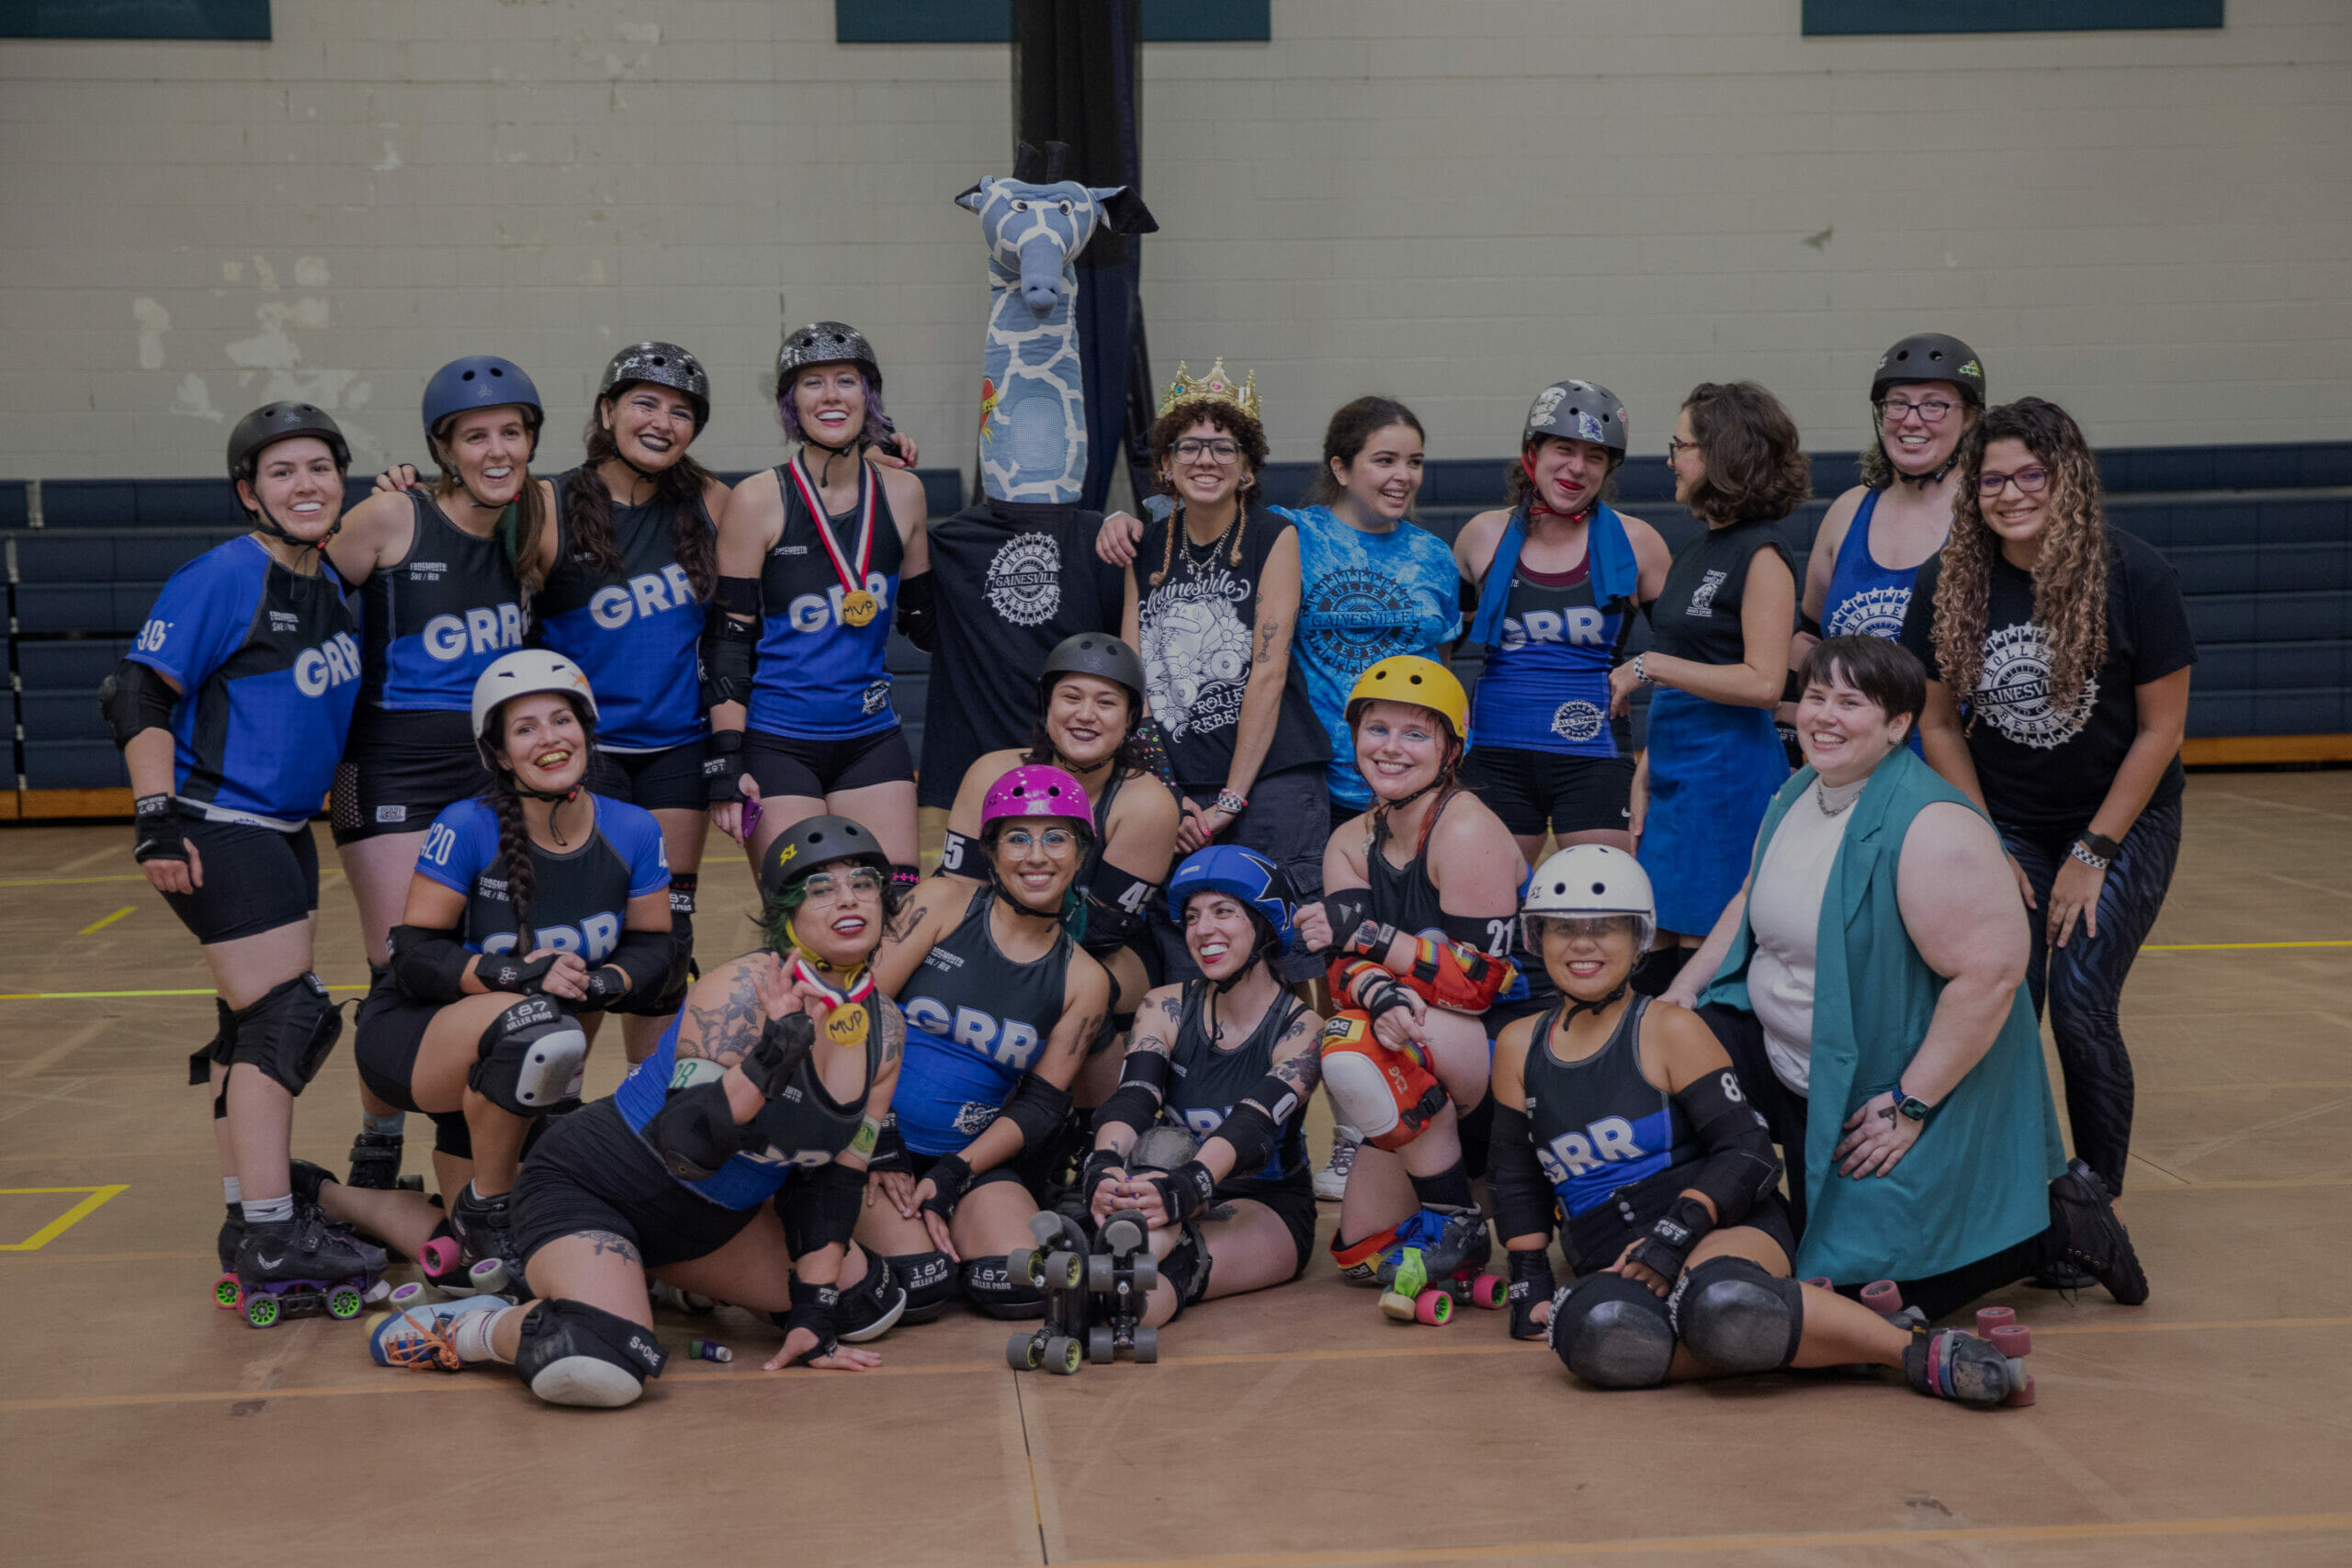 The entire GRR team, Riff Raff, and bench coaches pose together after a bout